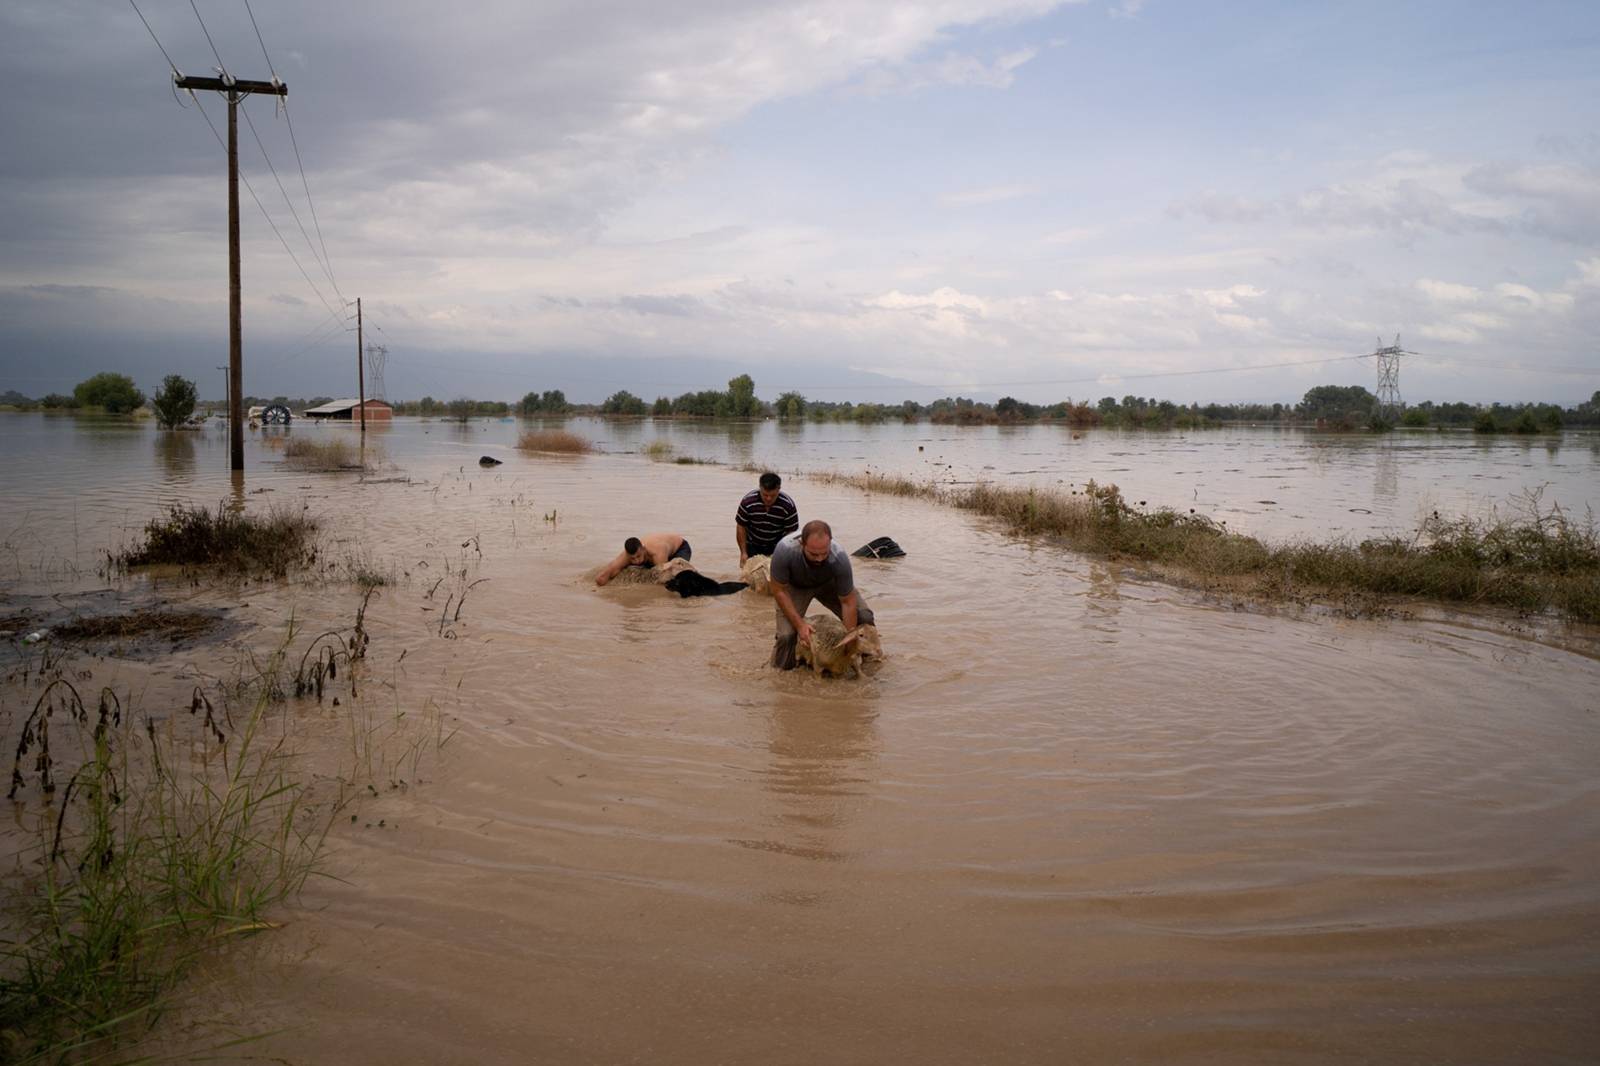 Sheep breeders save their animals from a flooded area, following a storm near the village of Megala Kalyvia